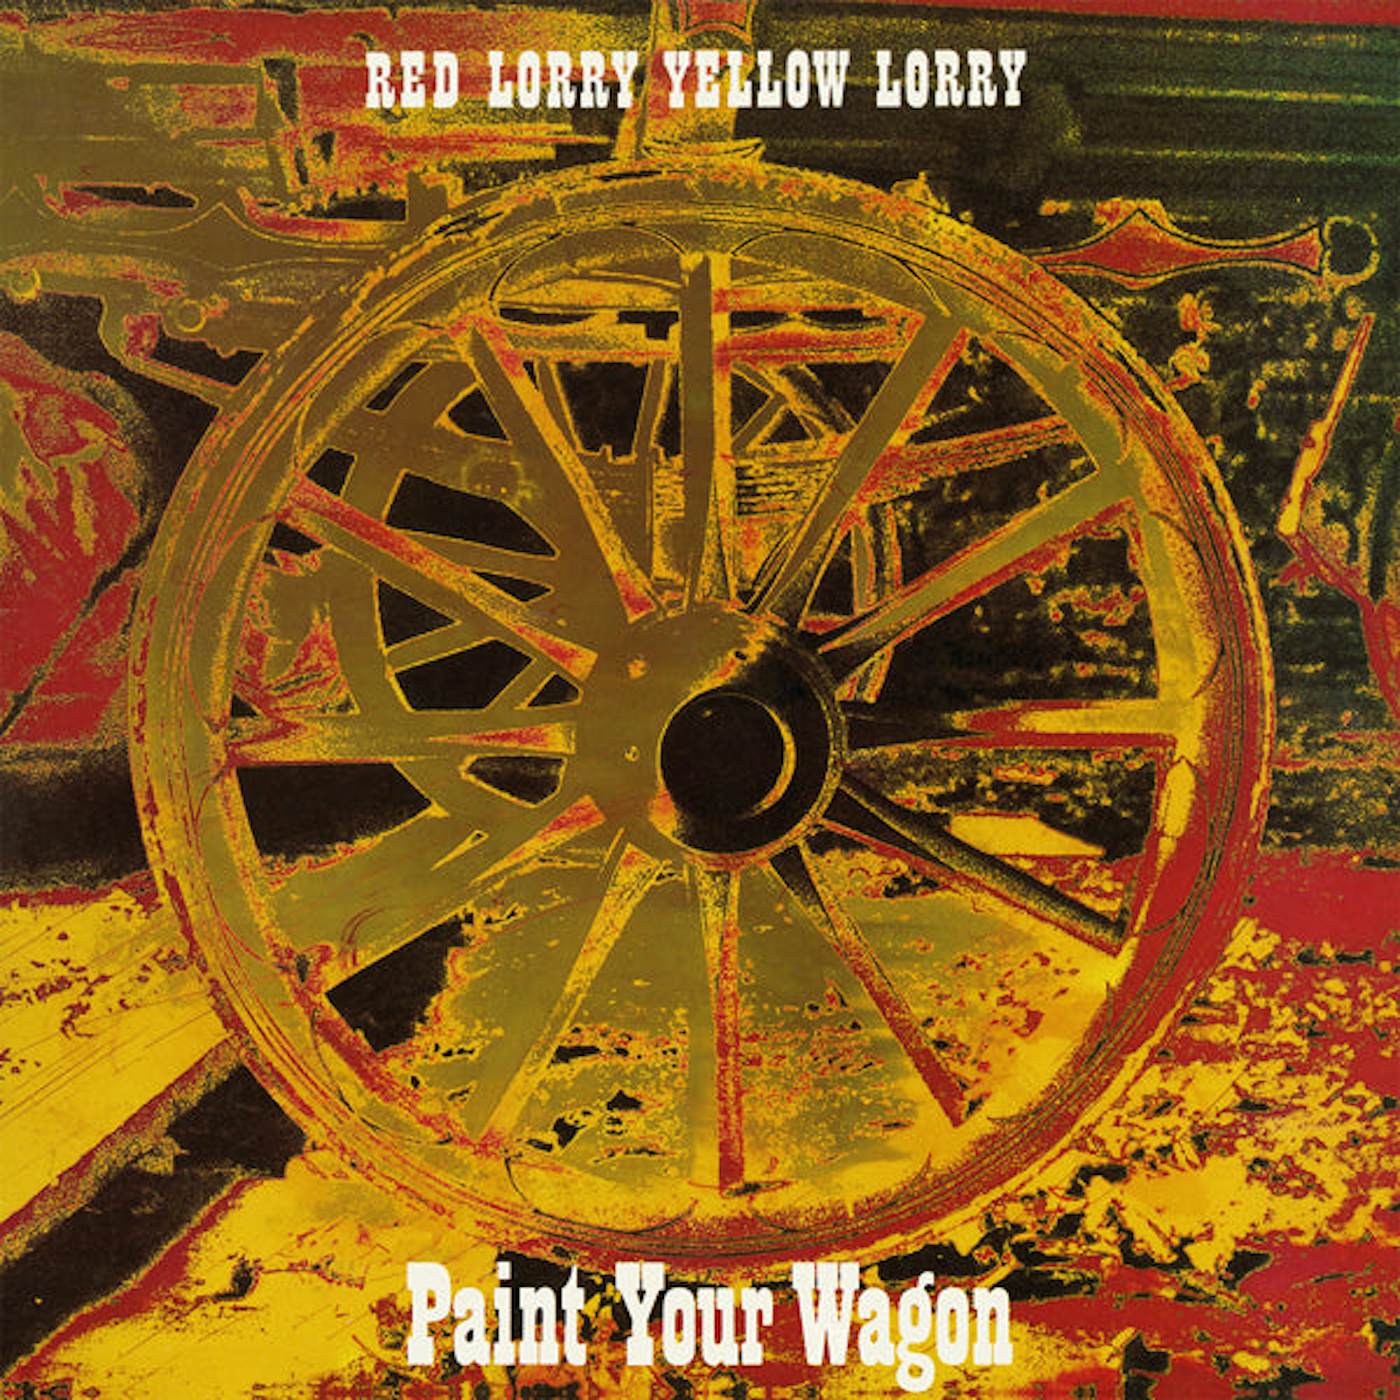 Red Lorry Yellow Lorry LP - Paint Your Wagon (Red Vinyl)